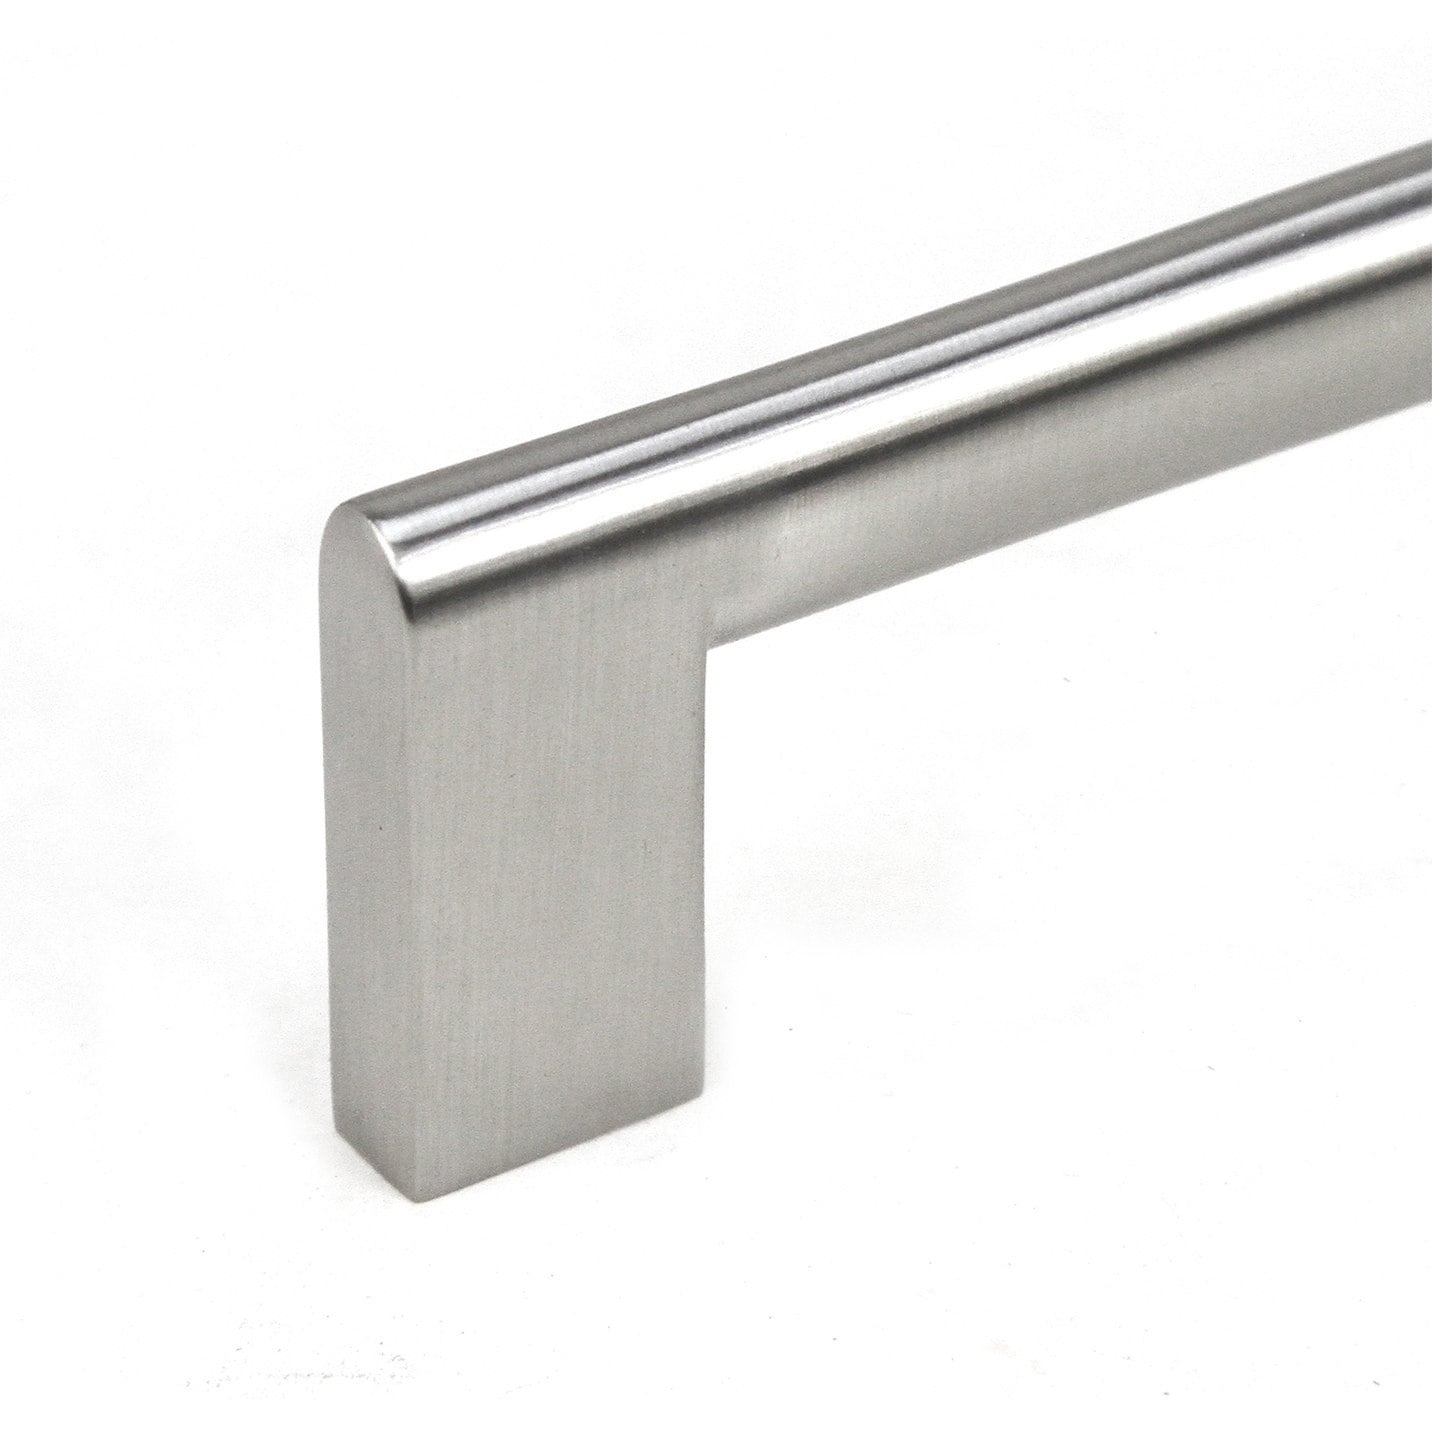 6-15/16 inch Key Shape Stainless Steel Handle Contemporary 6-15/16" Key Shape Design Stainless Steel Finish Cabinet Bar Pull Handle (Case of 4) - image 3 of 5